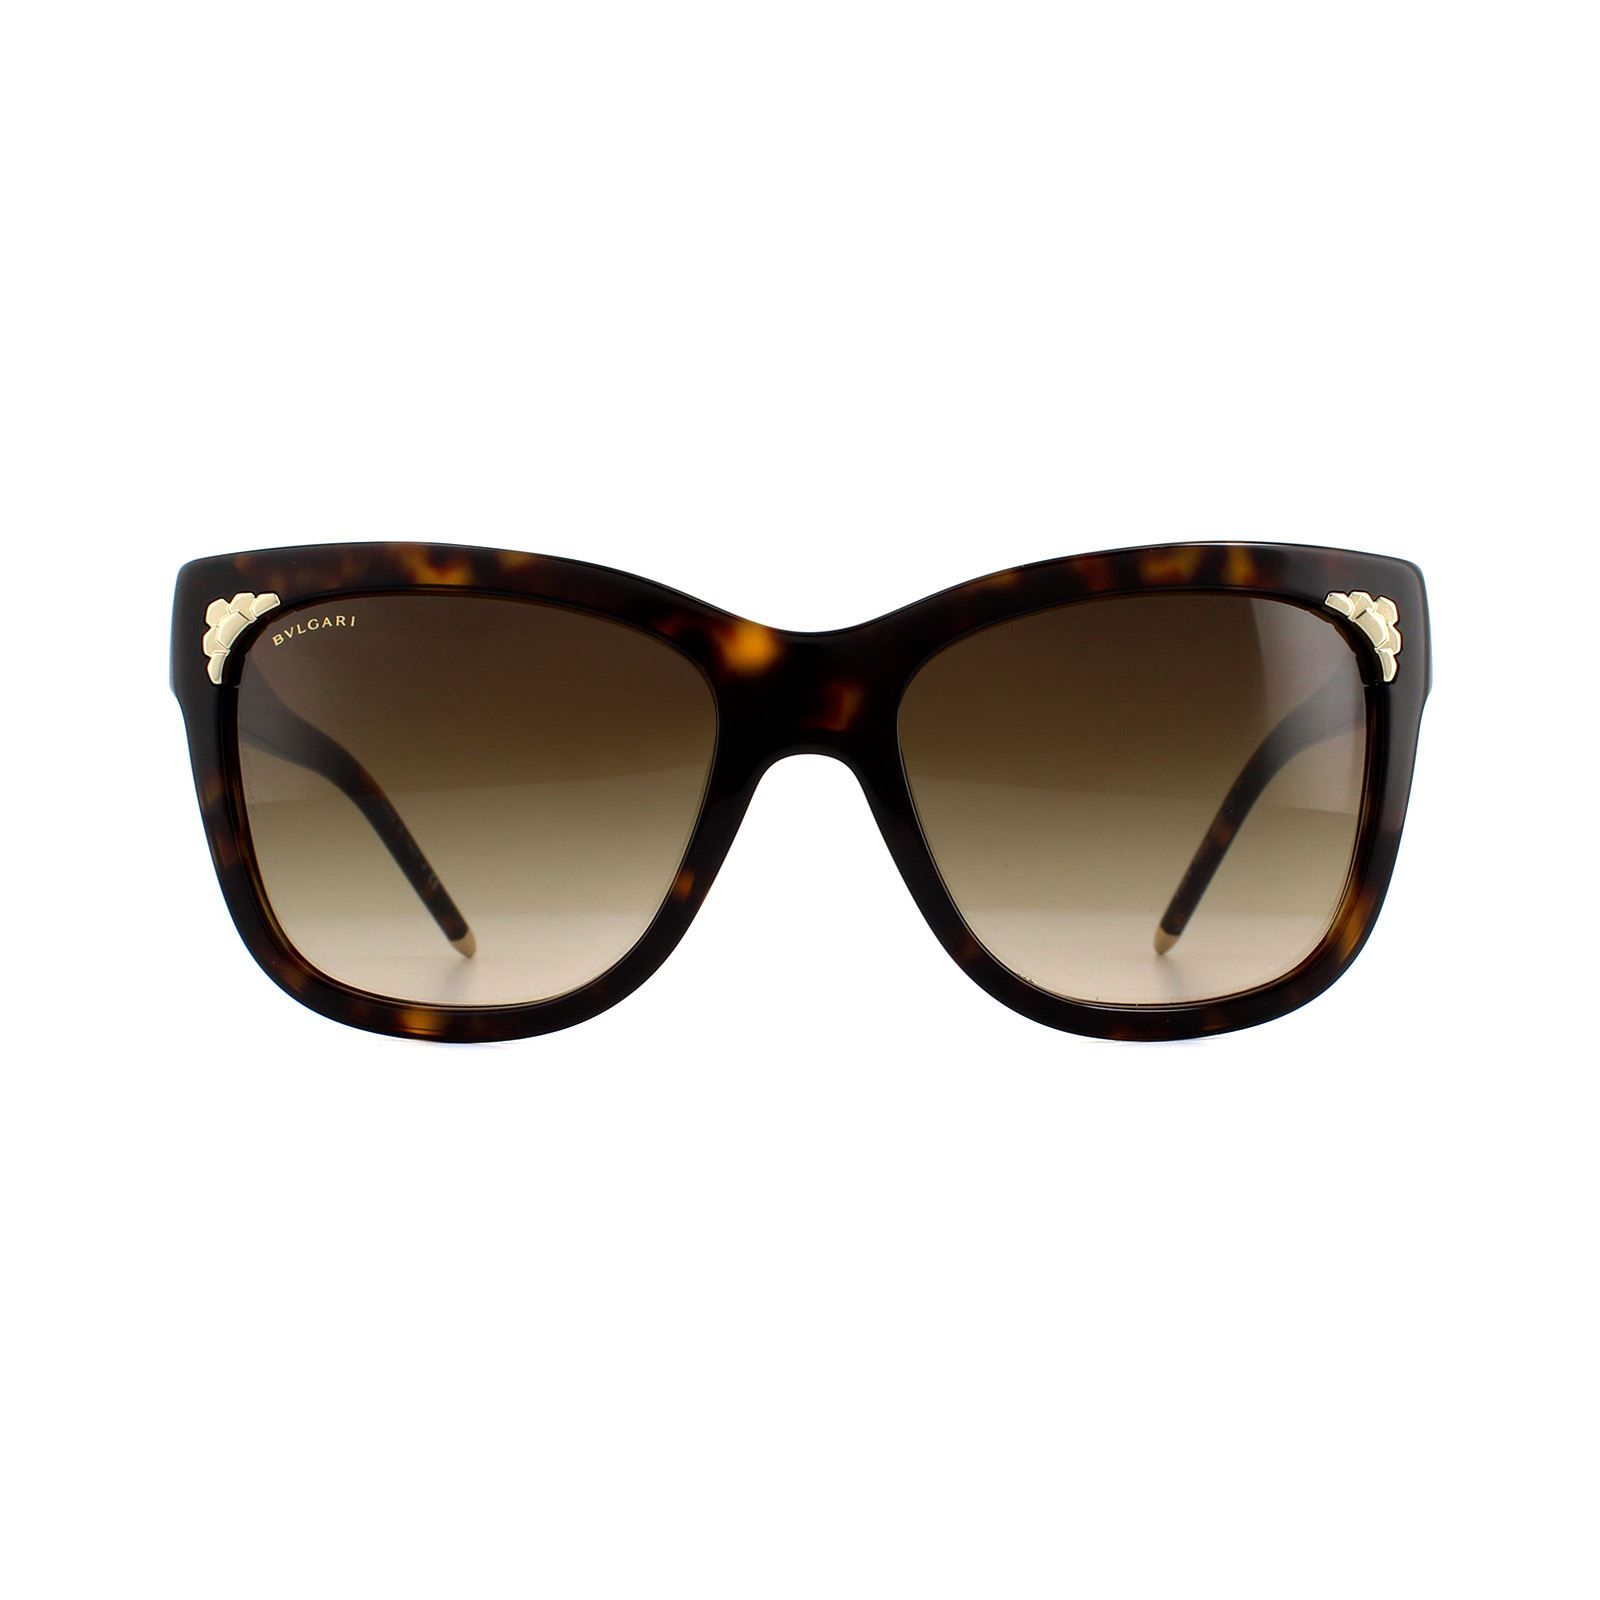 Bvlgari Sunglasses BV8134K 504/13 Dark Havana Brown Gradient are elegant square style sunglasses for women featuring Bvlgari's honeycomb pattern on the temples and lens corners. The Bvlgari logo is showcased on the temples for brand recognition.